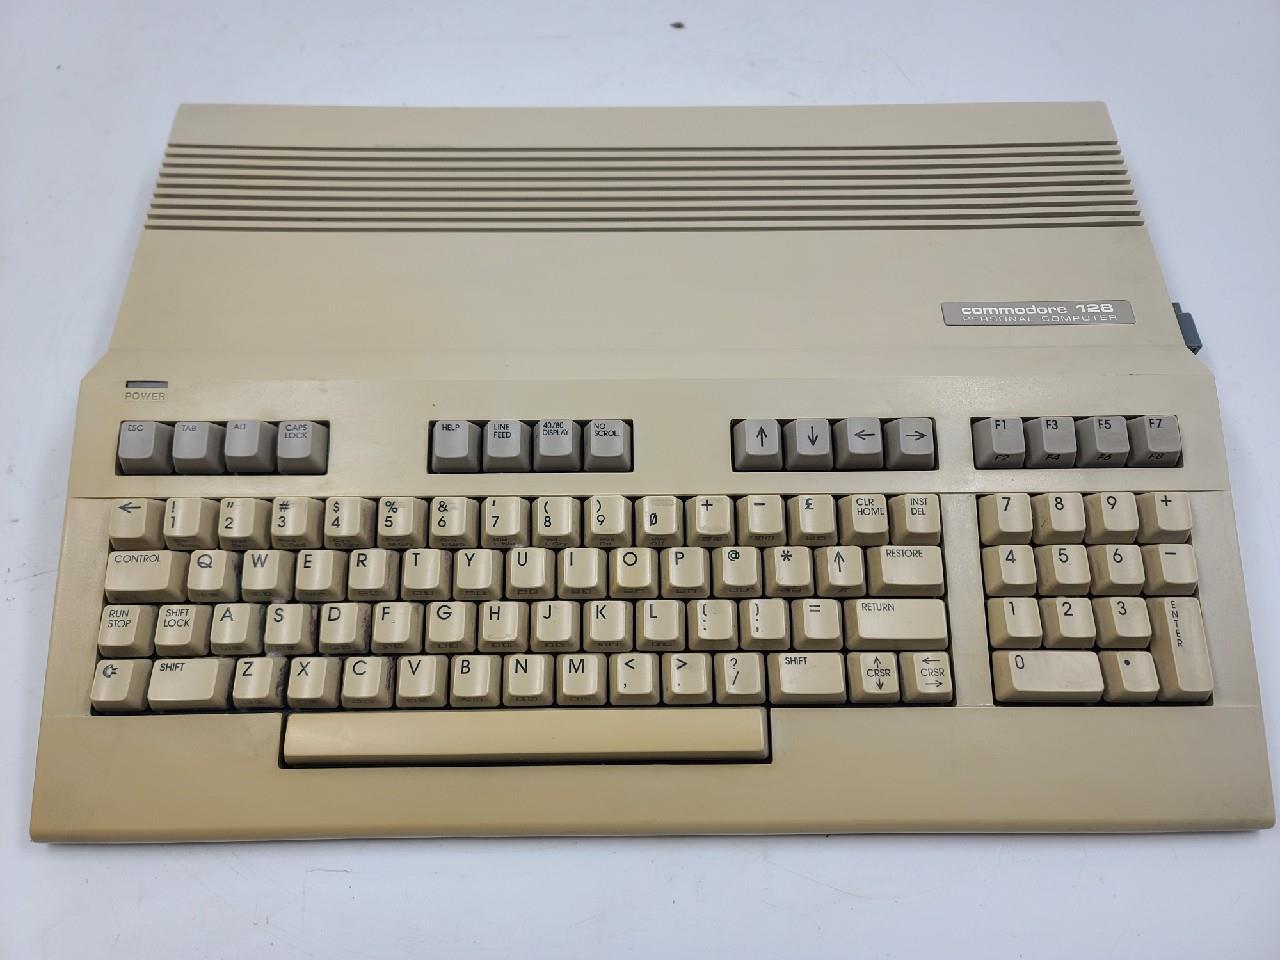 Commodore 128 Personal Computer Model C128 - As Is, Untested